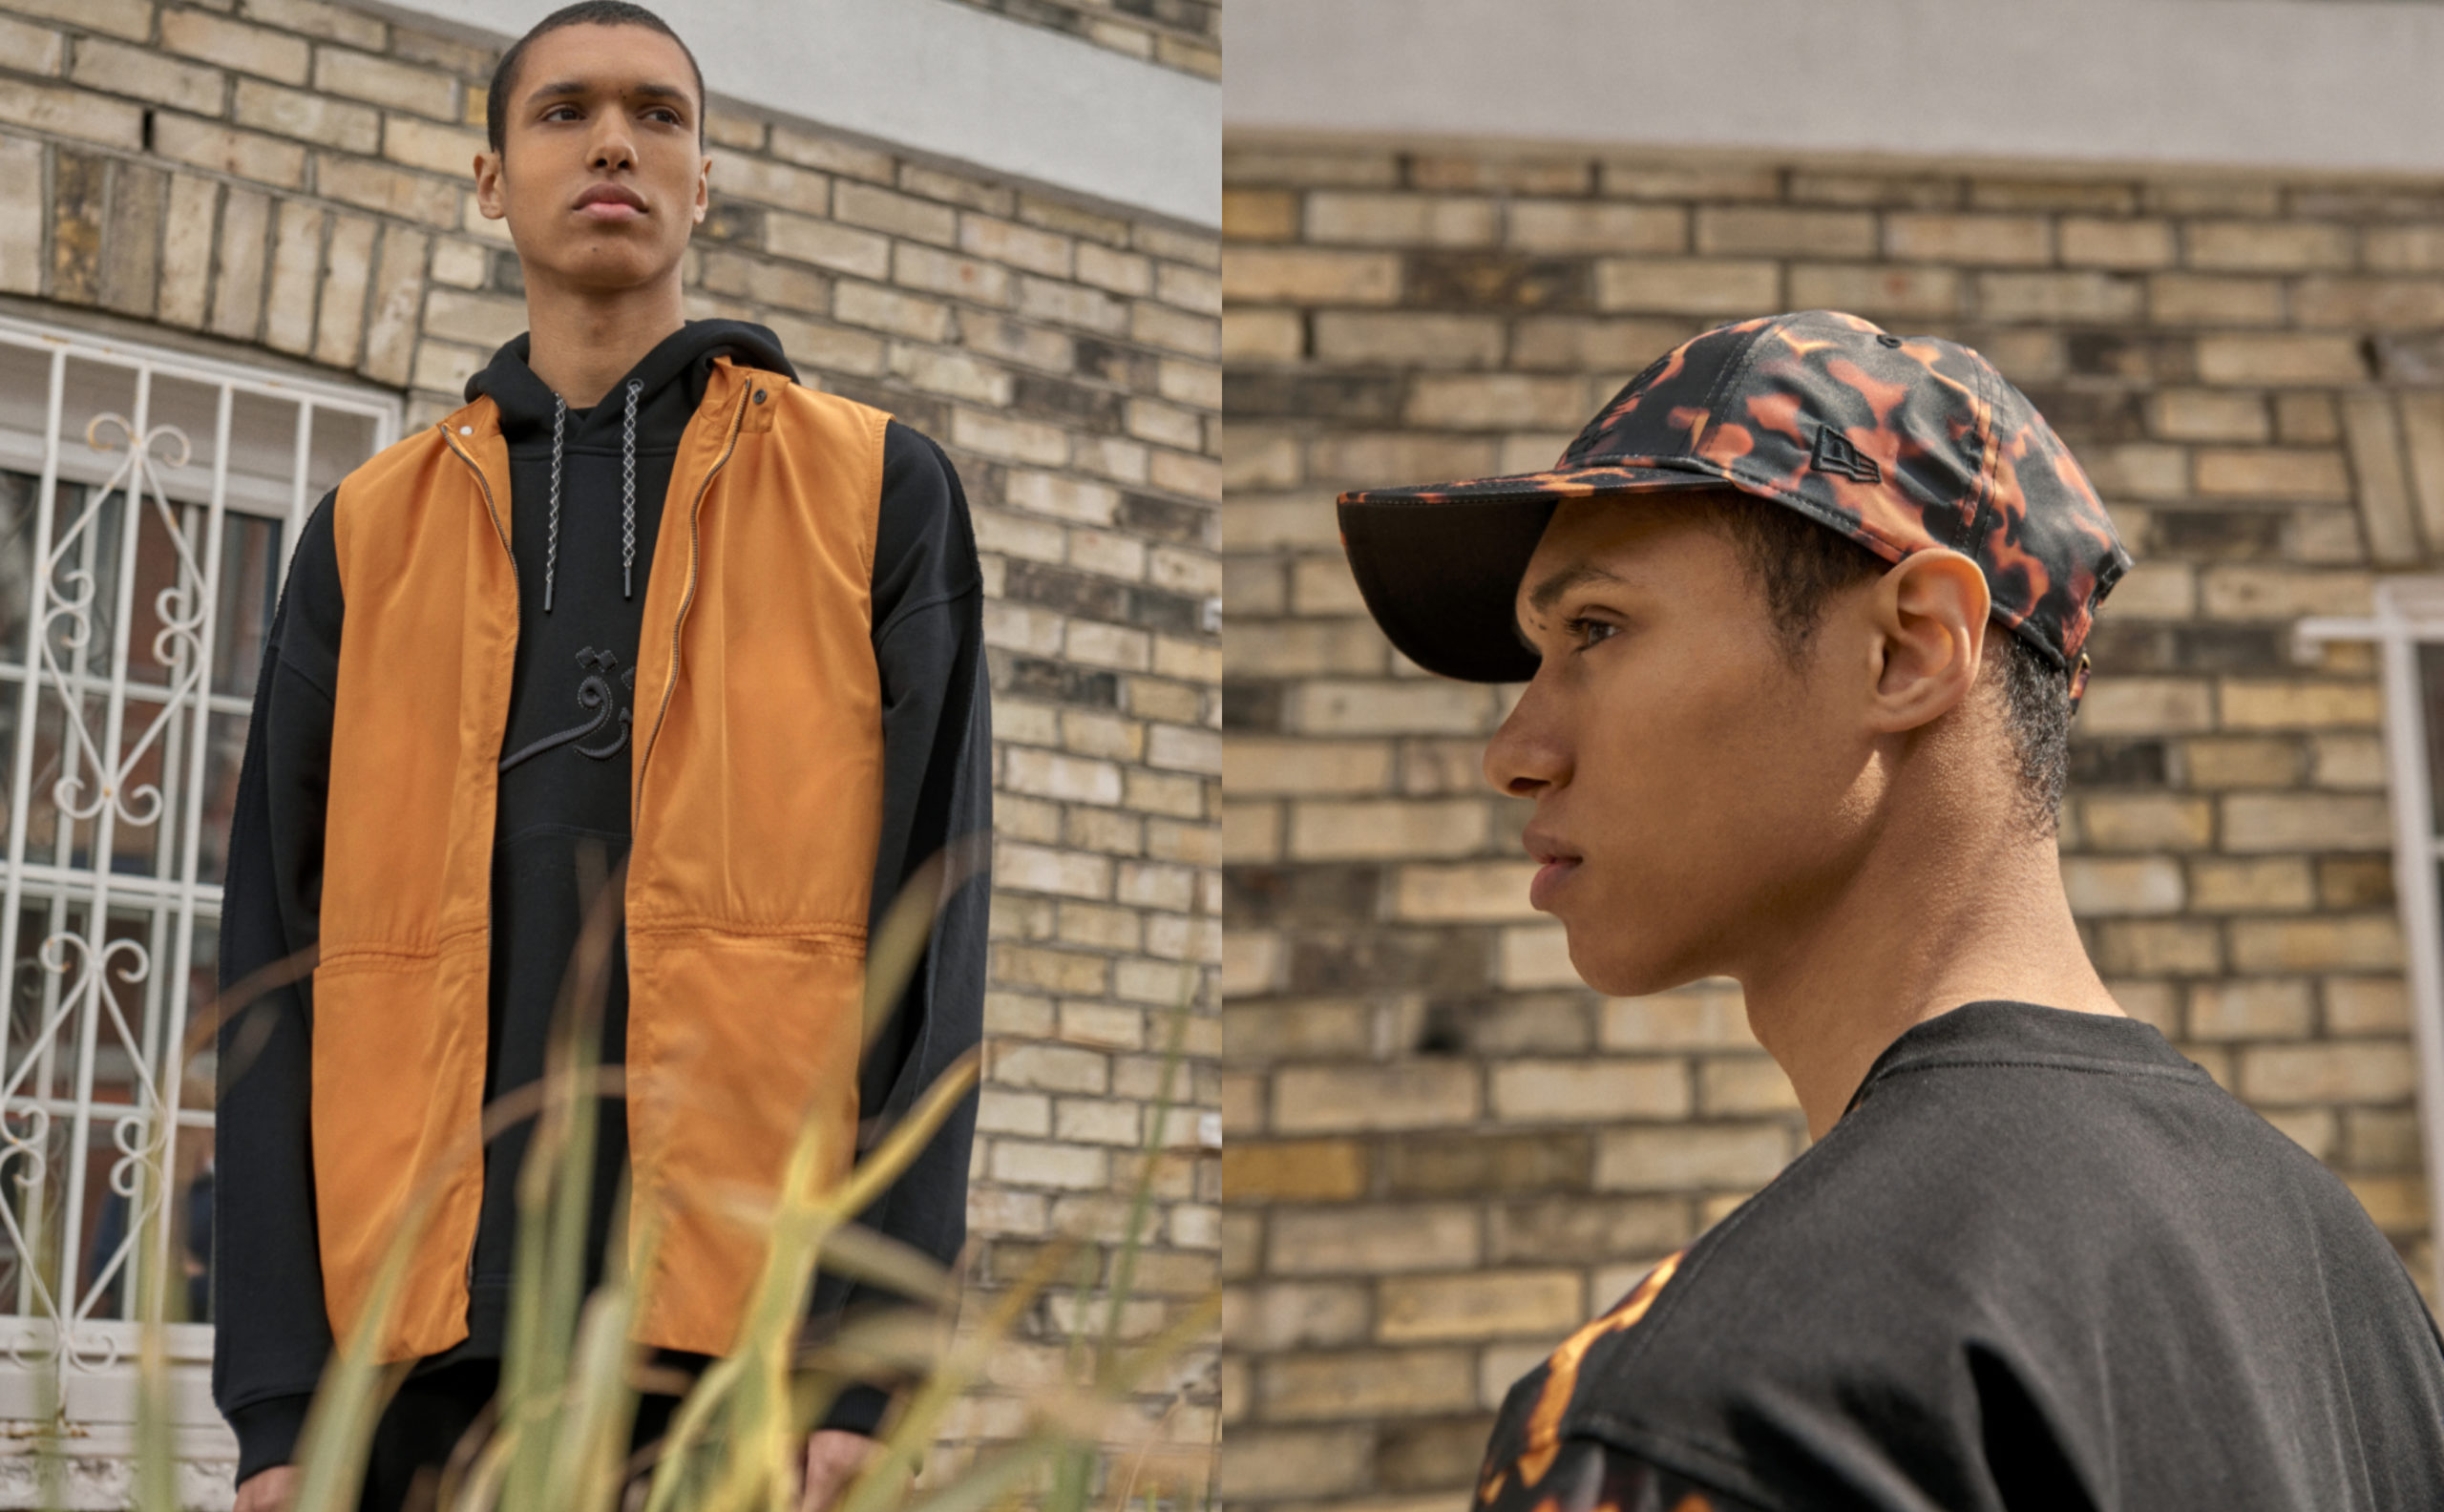 Qasimi’s Latest Collection Includes a New Era Collab